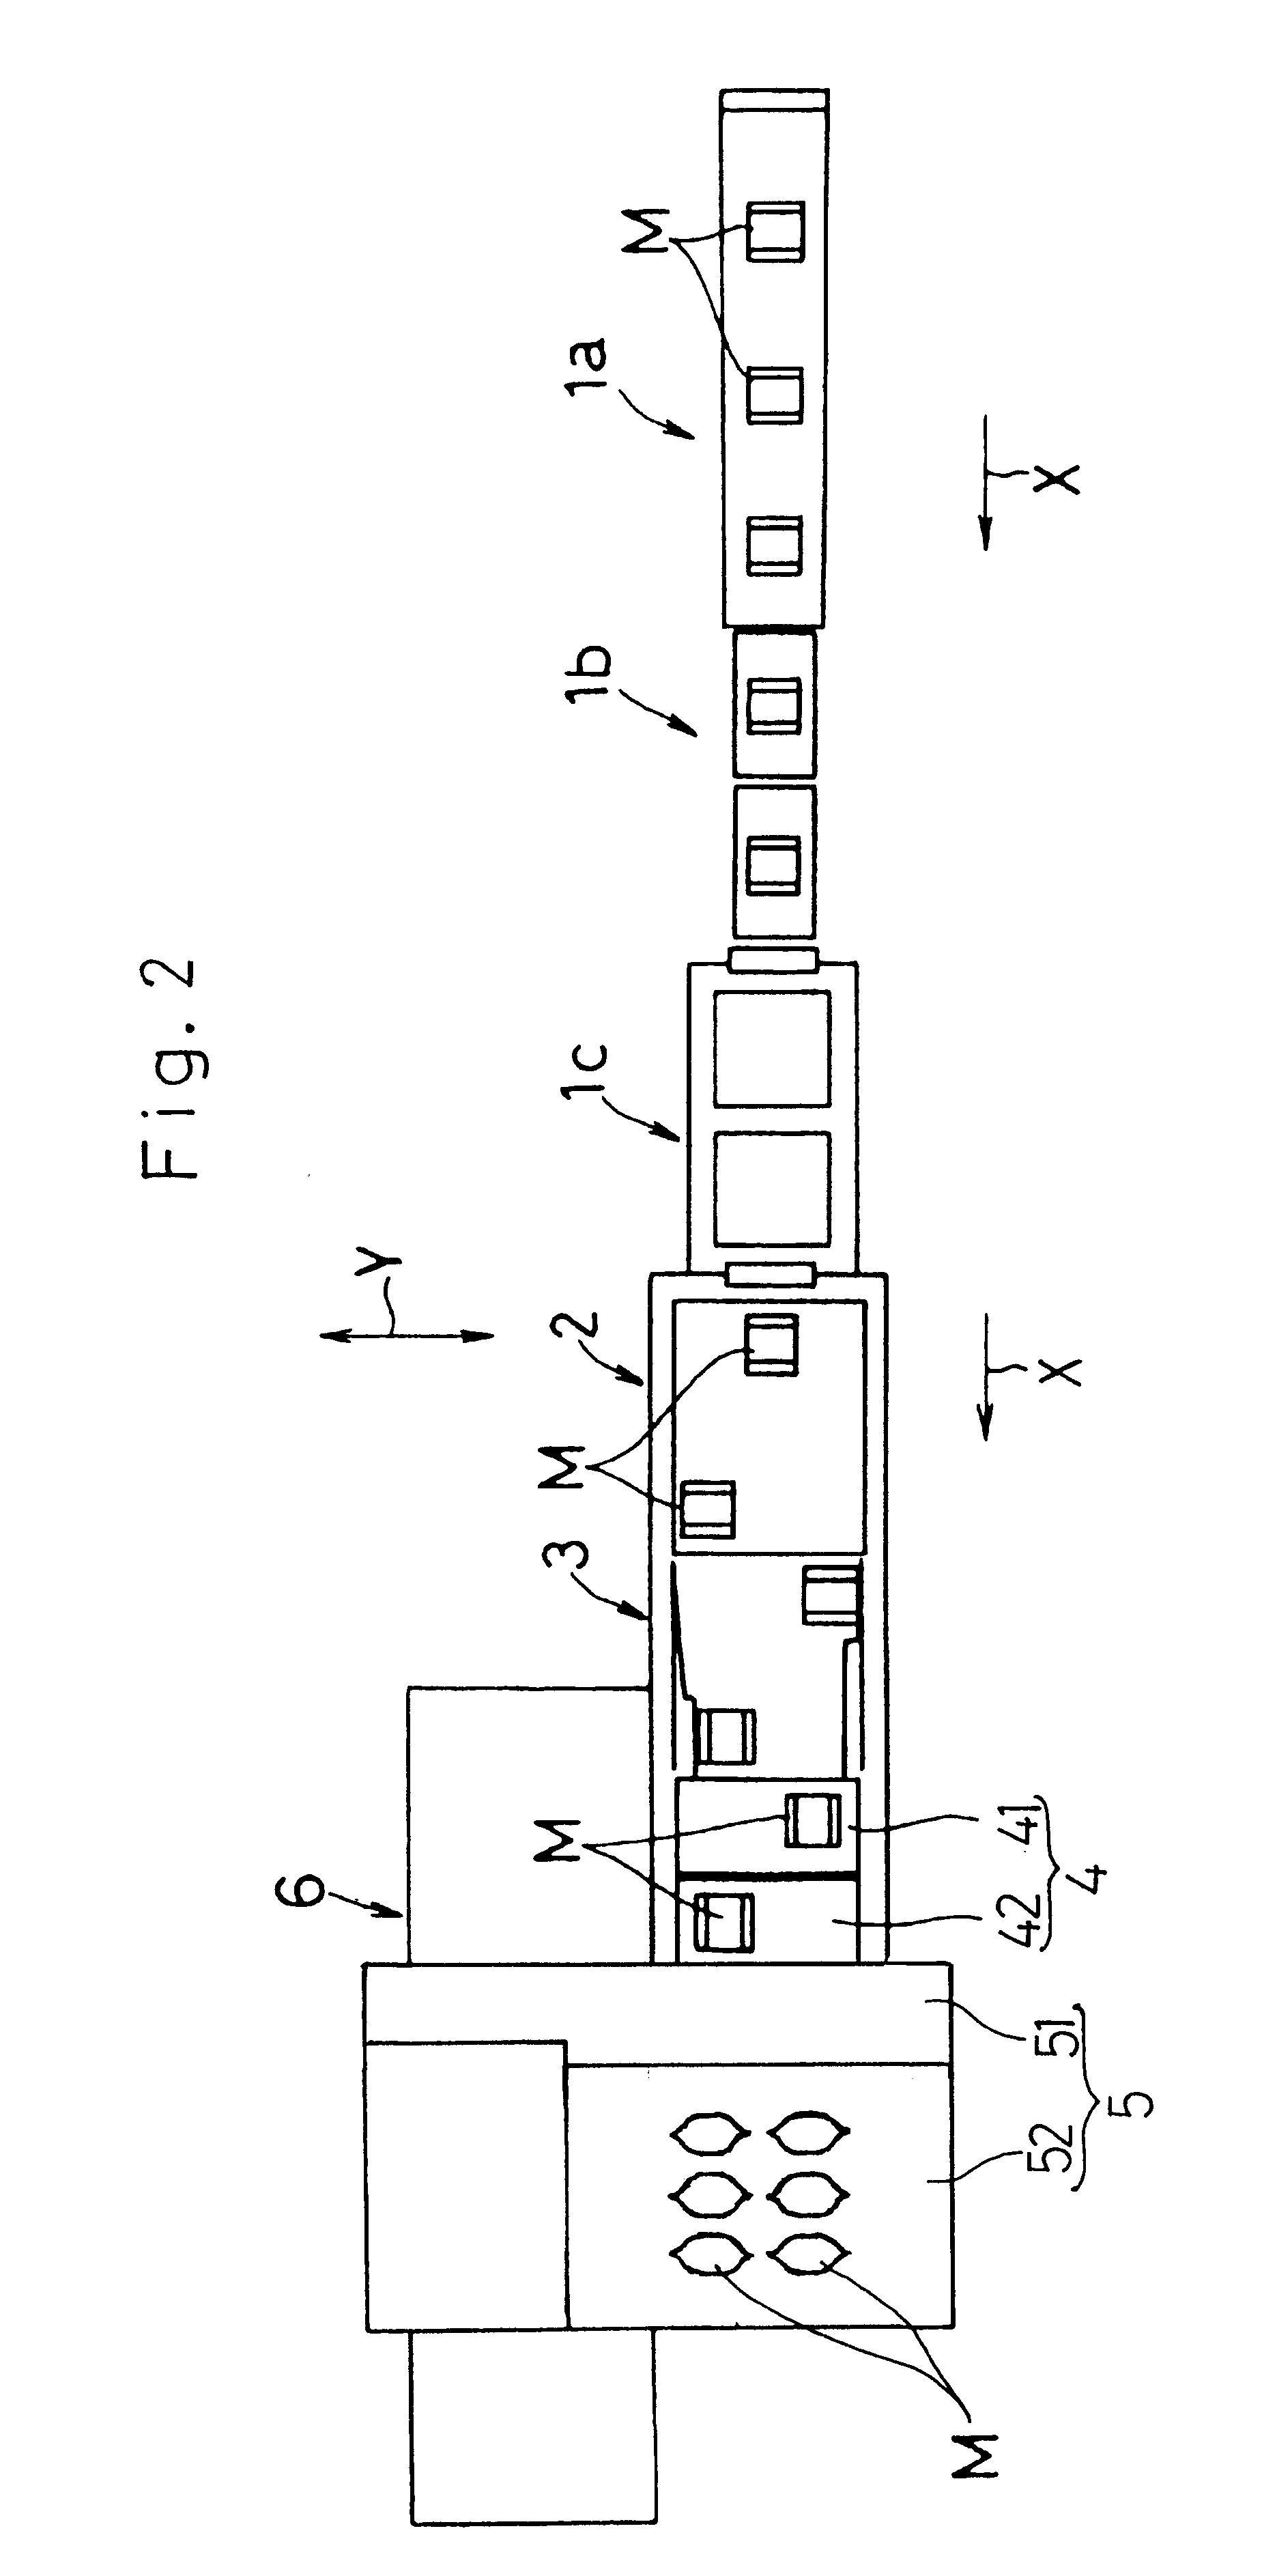 Product diverting mechanism in packaging system